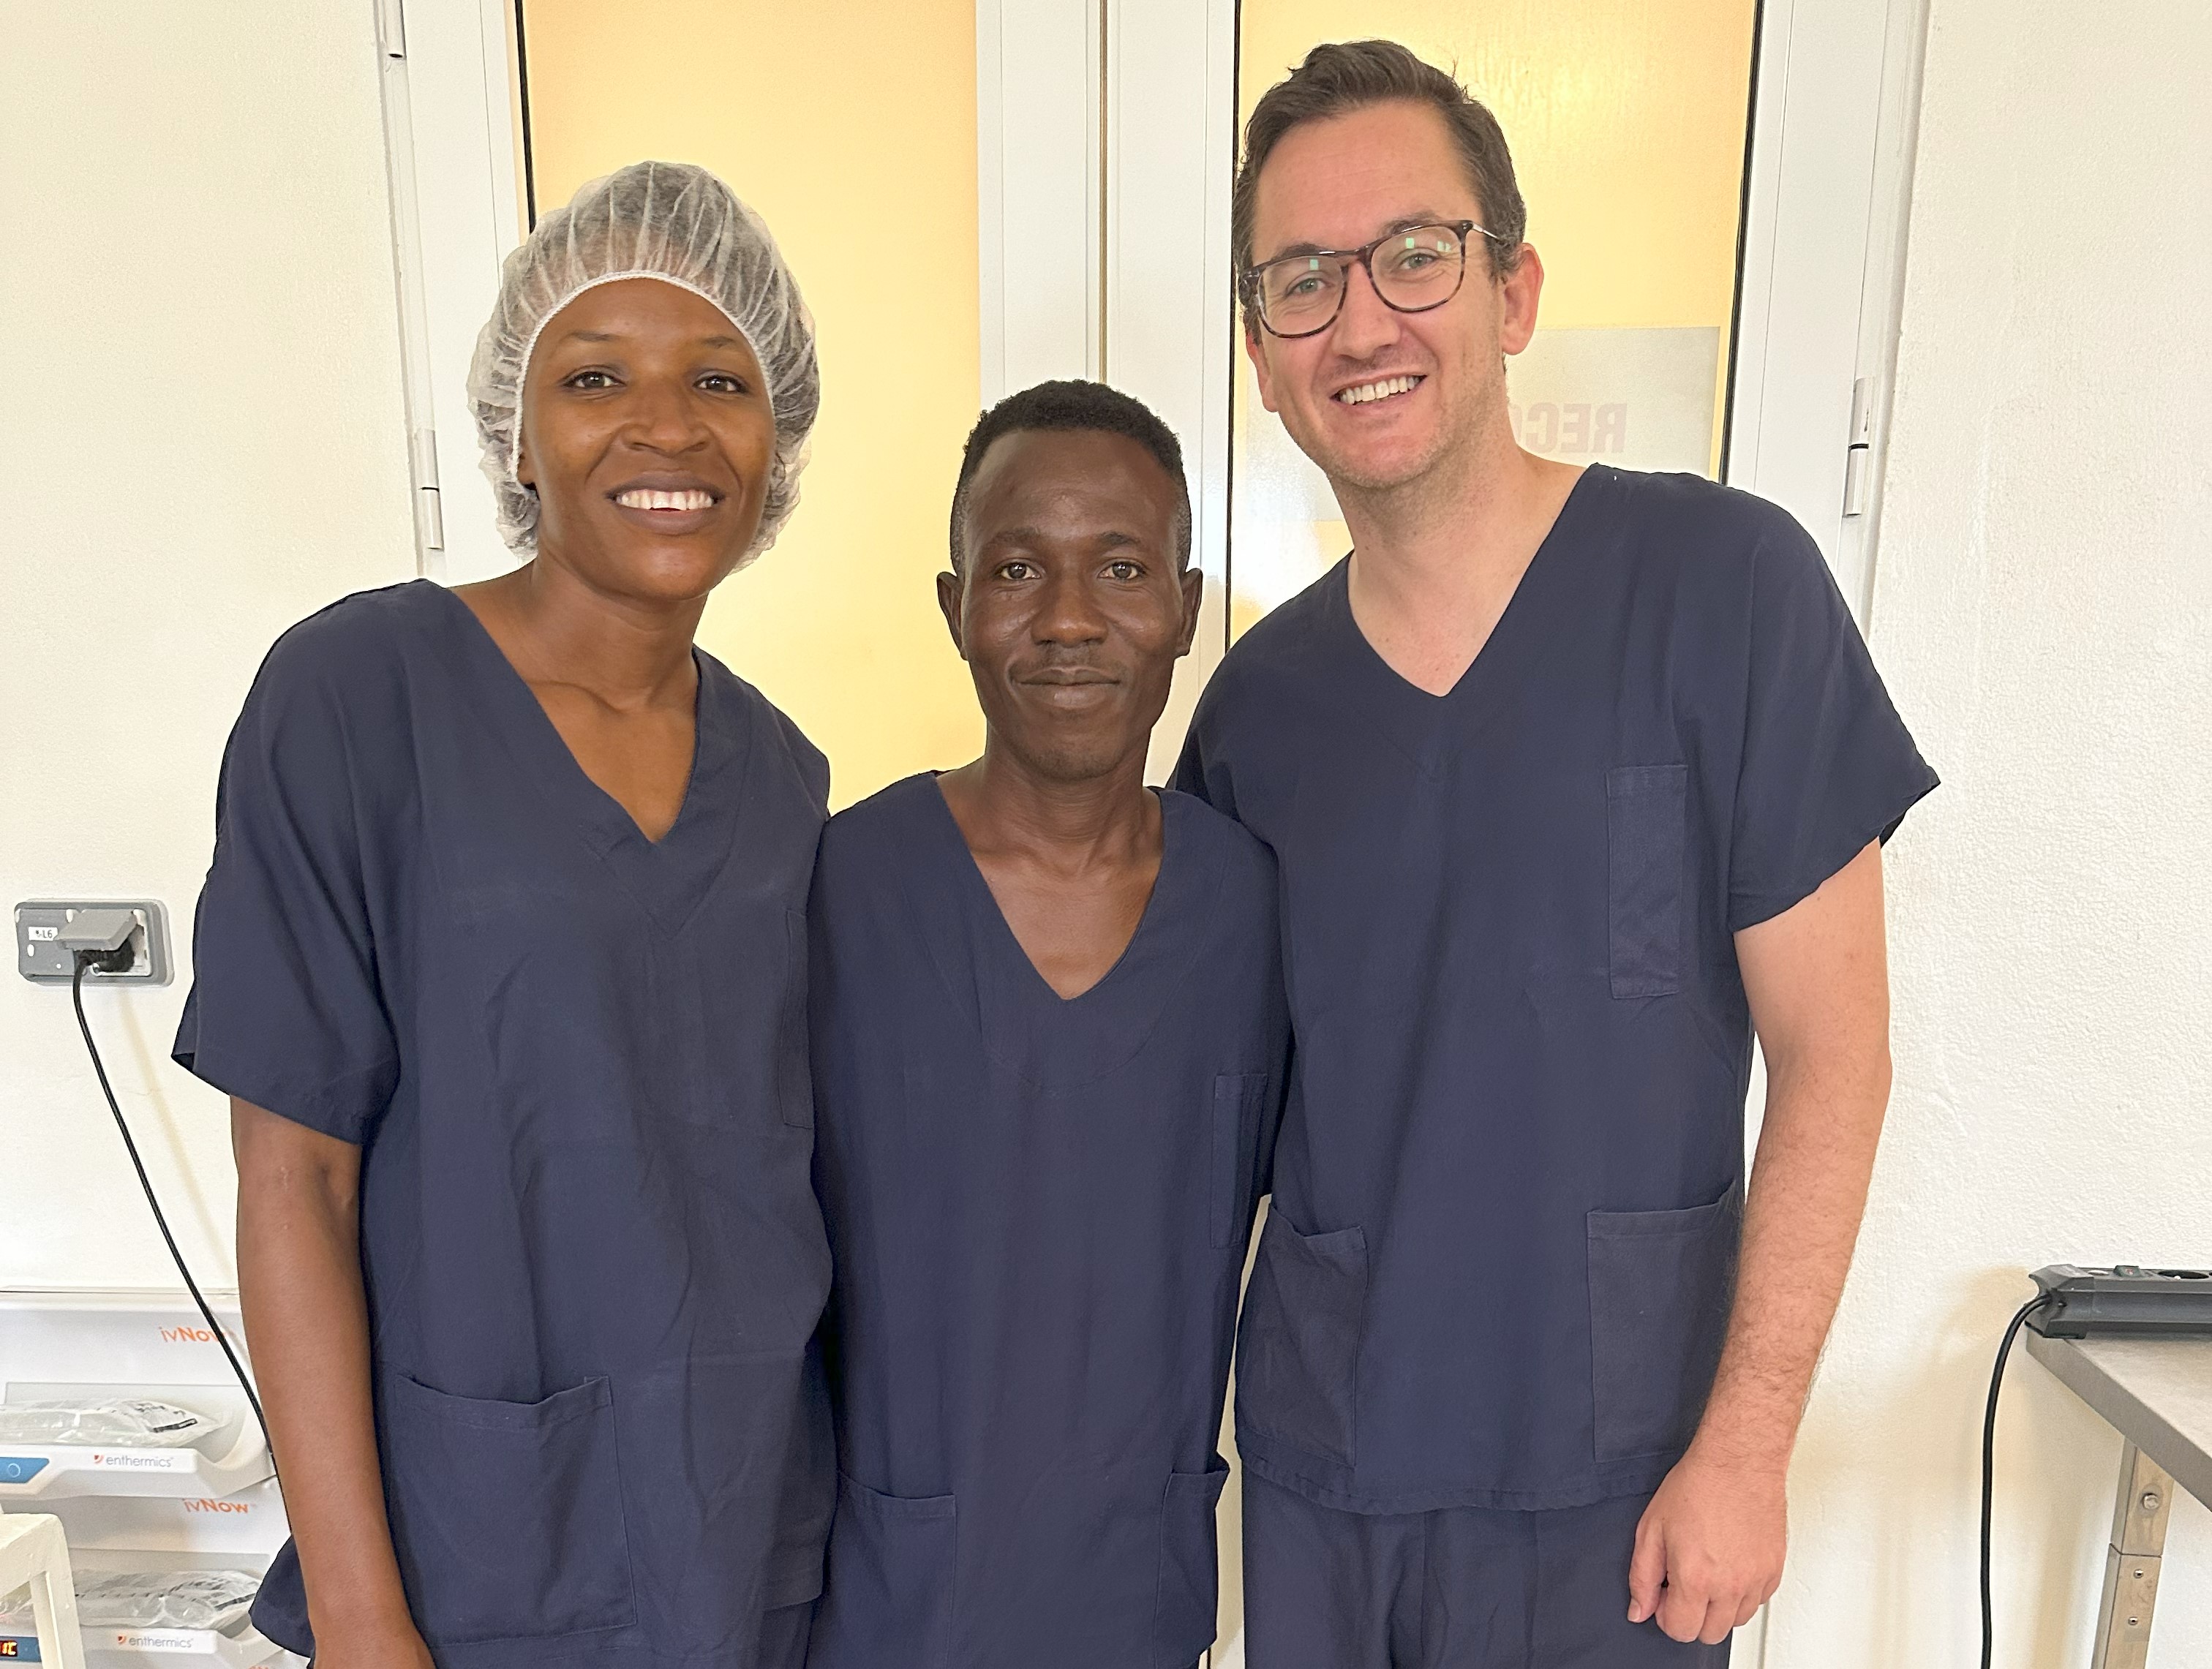 Jared with an anaesthetic nurse and surgical community health officer in Sierra Leone